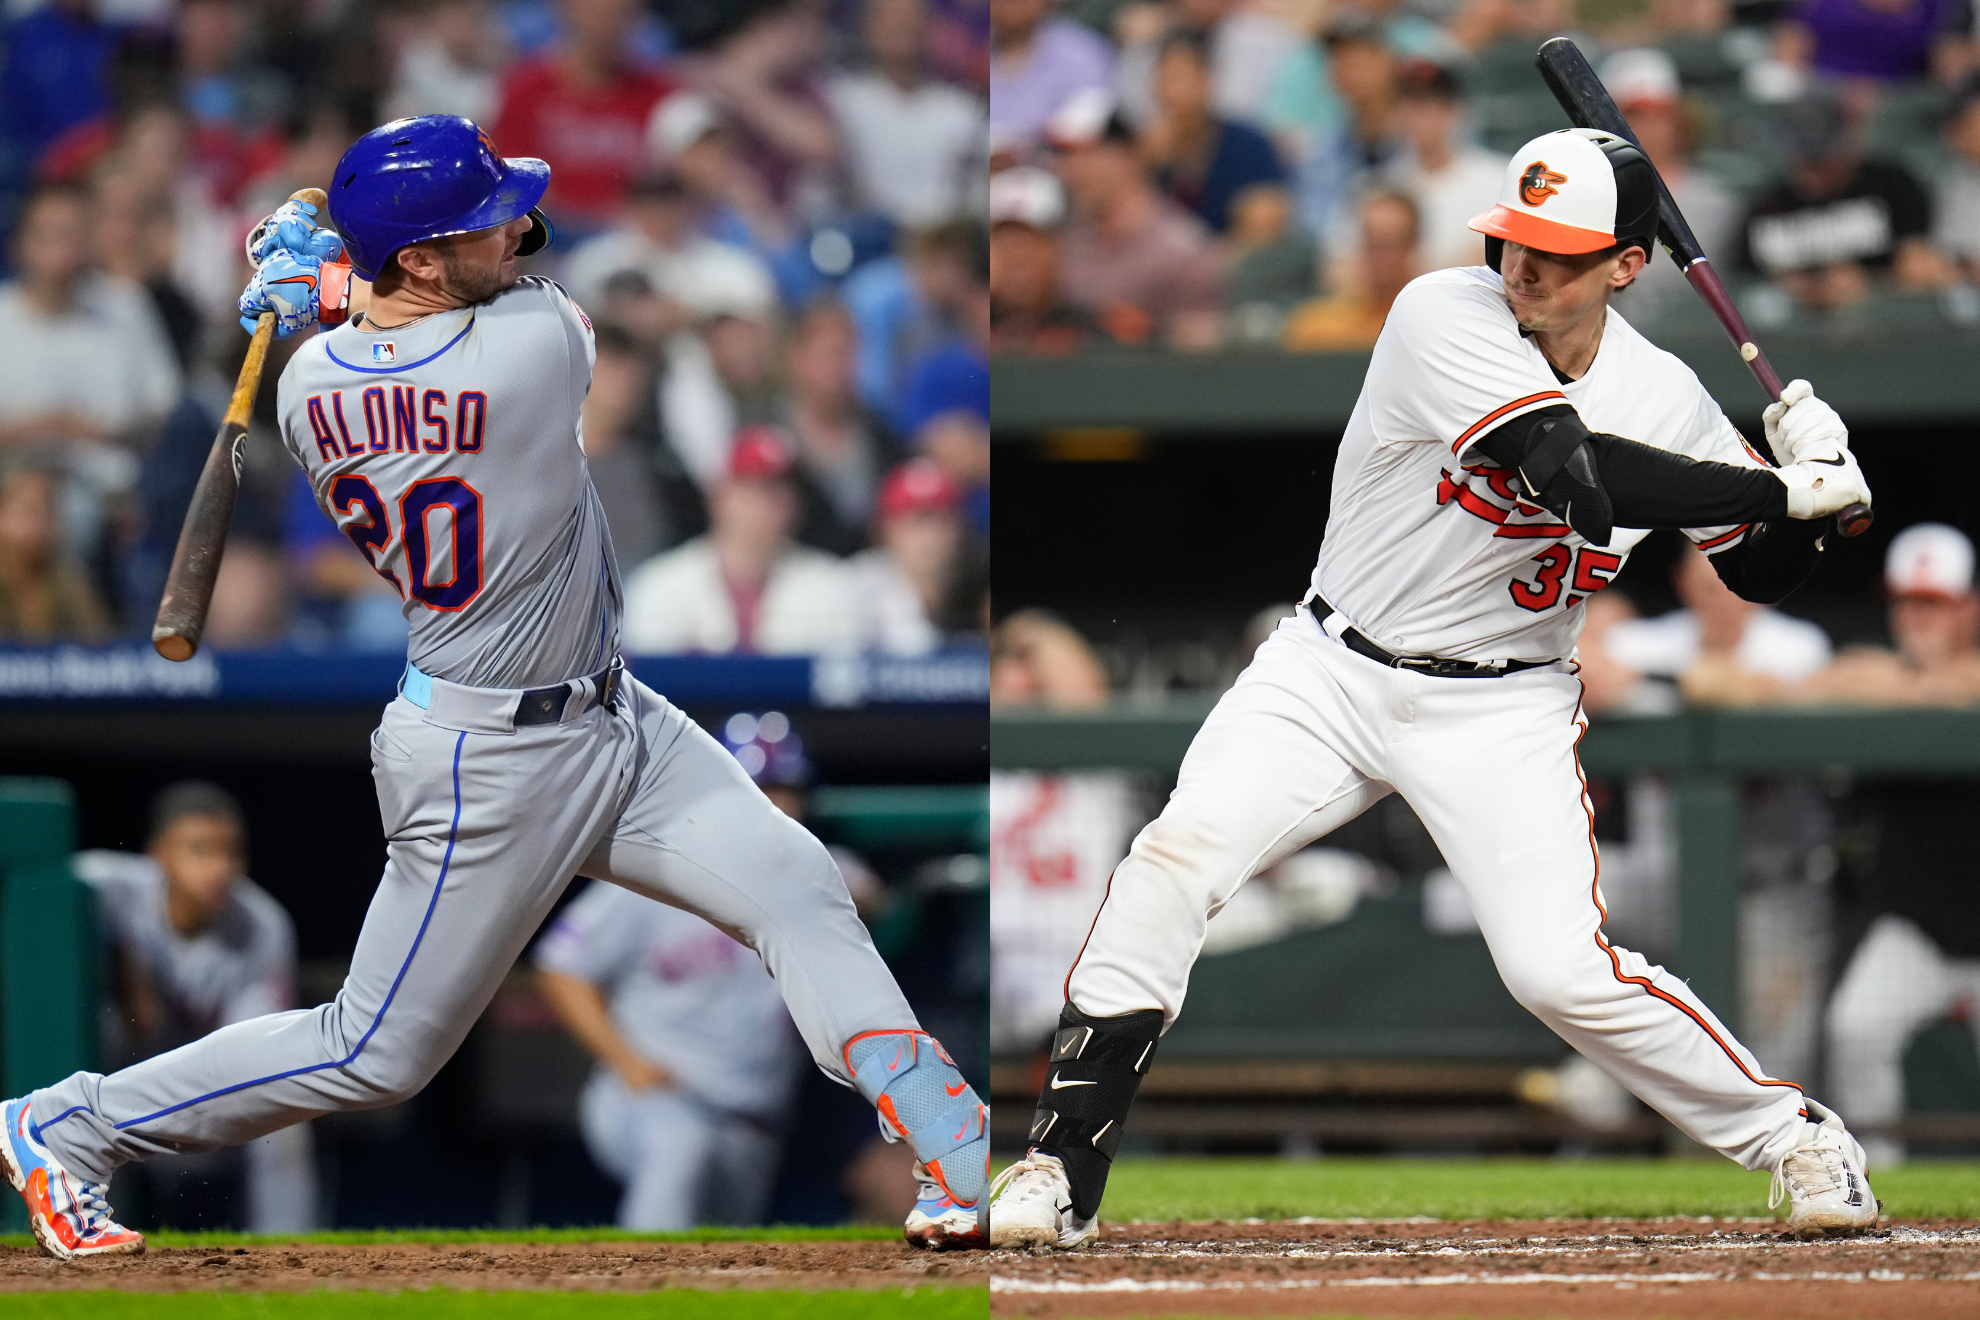 Pete Alonso and Adley Rutschman are the newest players added to the 2023 Home Run Derby roster.